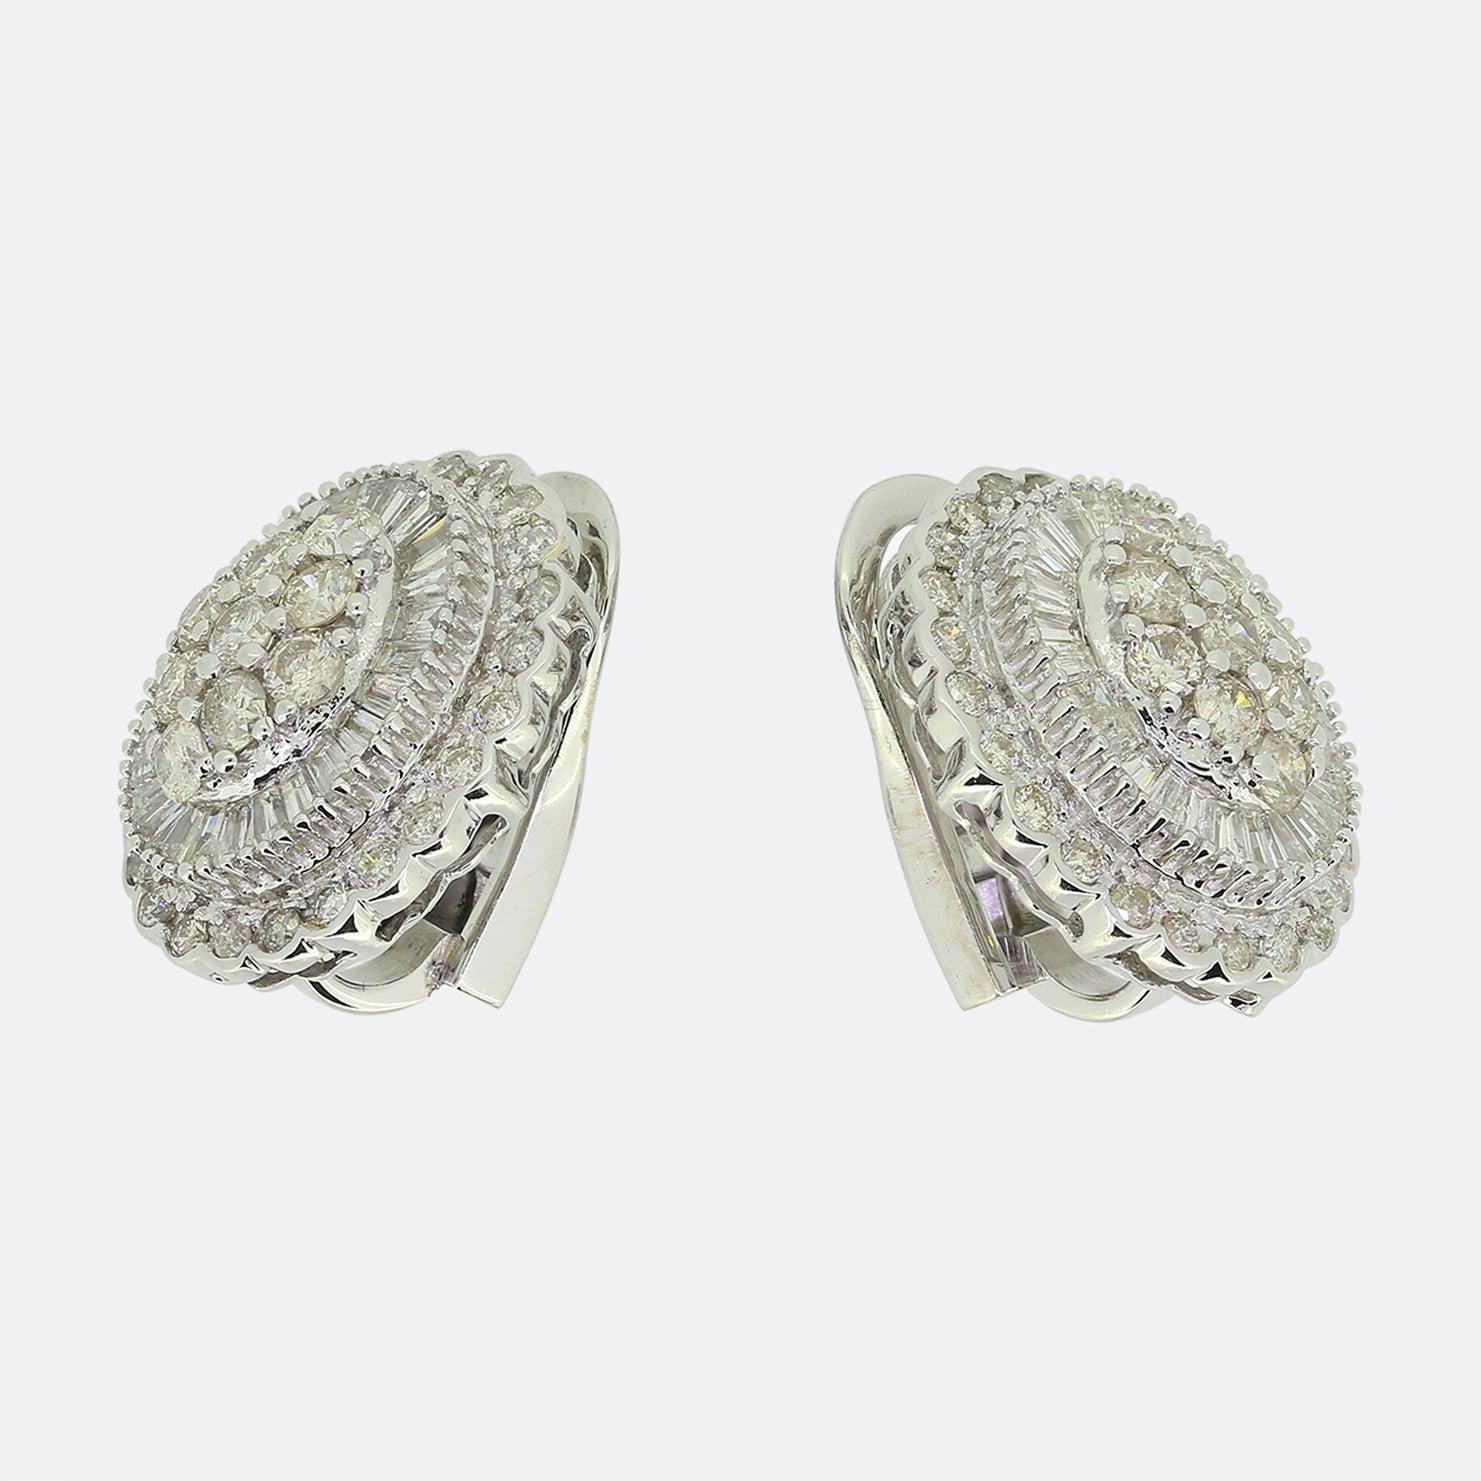 Here we have an scintillating pair of diamond cluster earrings. Each earring has been crafted from 18ct white gold with both pieces identically playing host to three layers of diamonds. The first layer showcases 9 round brilliant cut diamonds; all